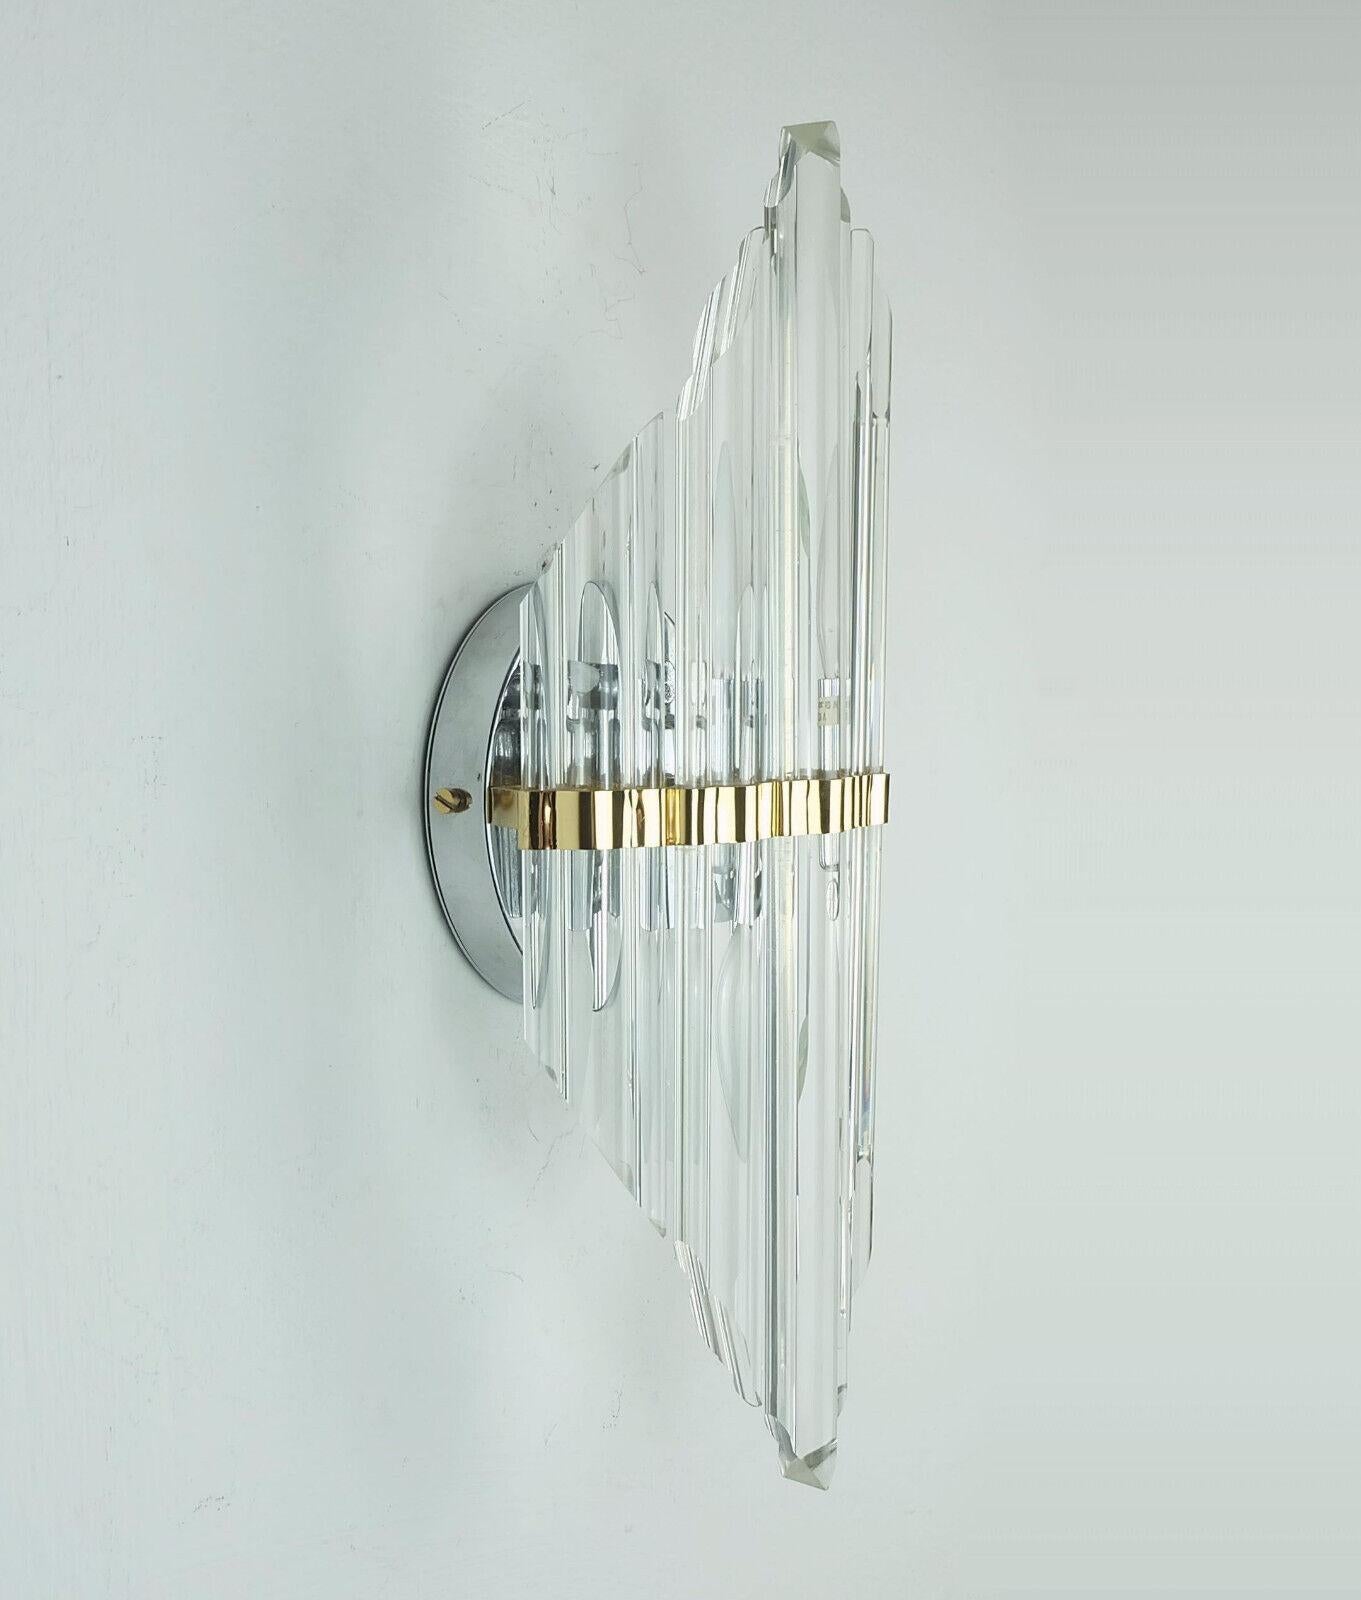 Stylish and glamorous vintage wall lamp from Spain. The wall bracket and support of the rods are made of chrome-plated or gold-colored metal, the shade is formed by solid glass rods of different lengths arranged in a fan-like manner. For 2 E14 light